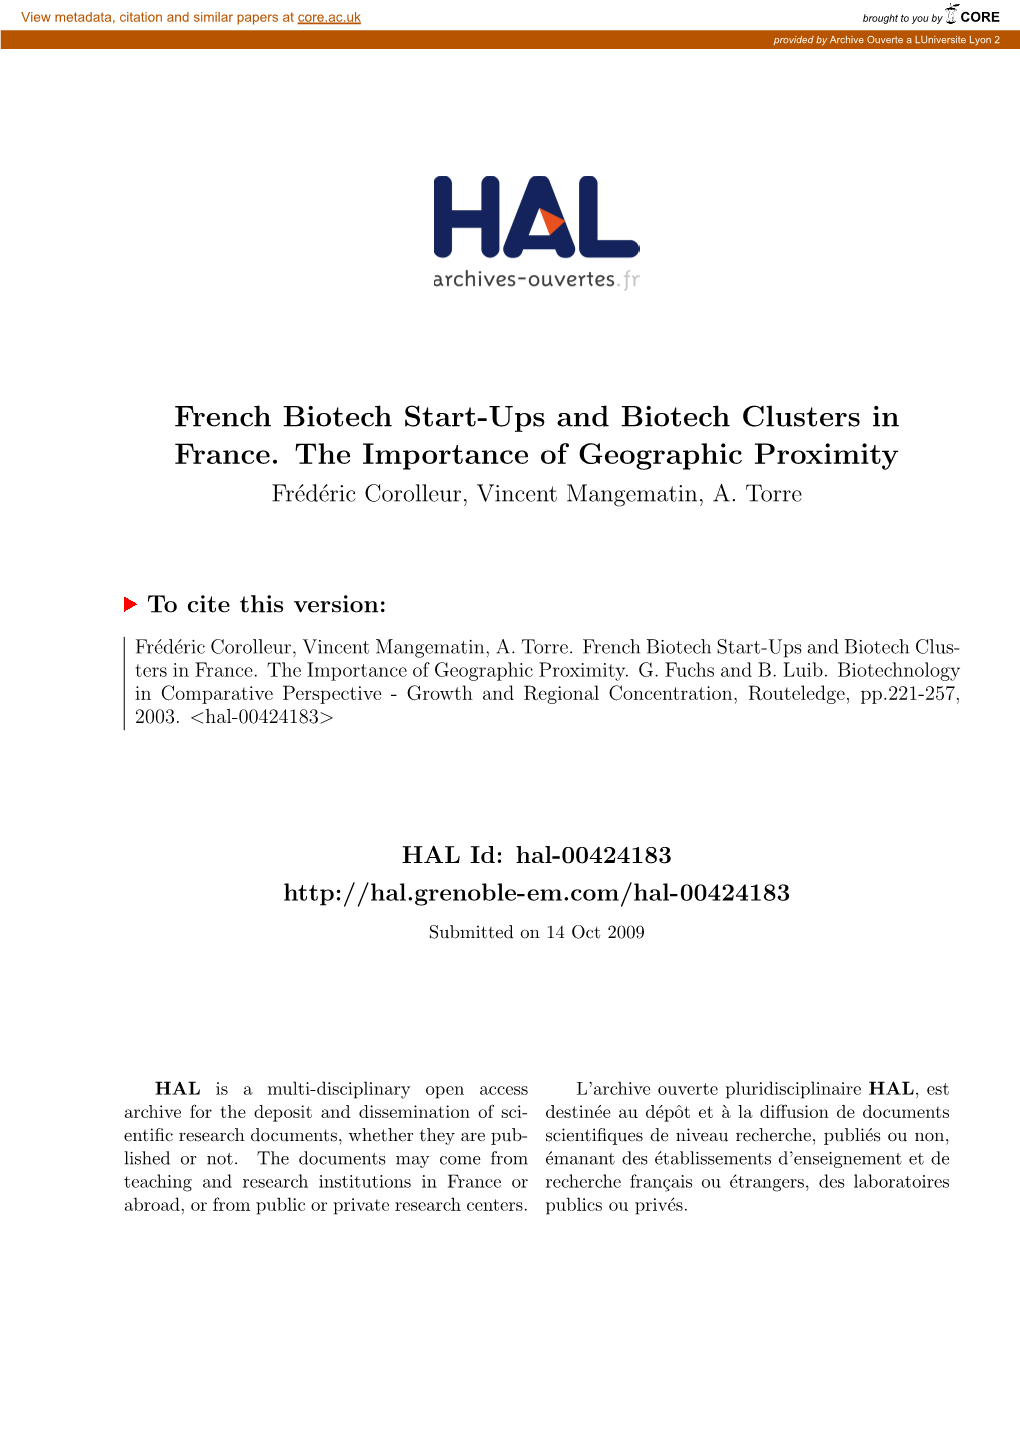 French Biotech Start-Ups and Biotech Clusters in France. the Importance of Geographic Proximity Fr´Ed´Ericcorolleur, Vincent Mangematin, A